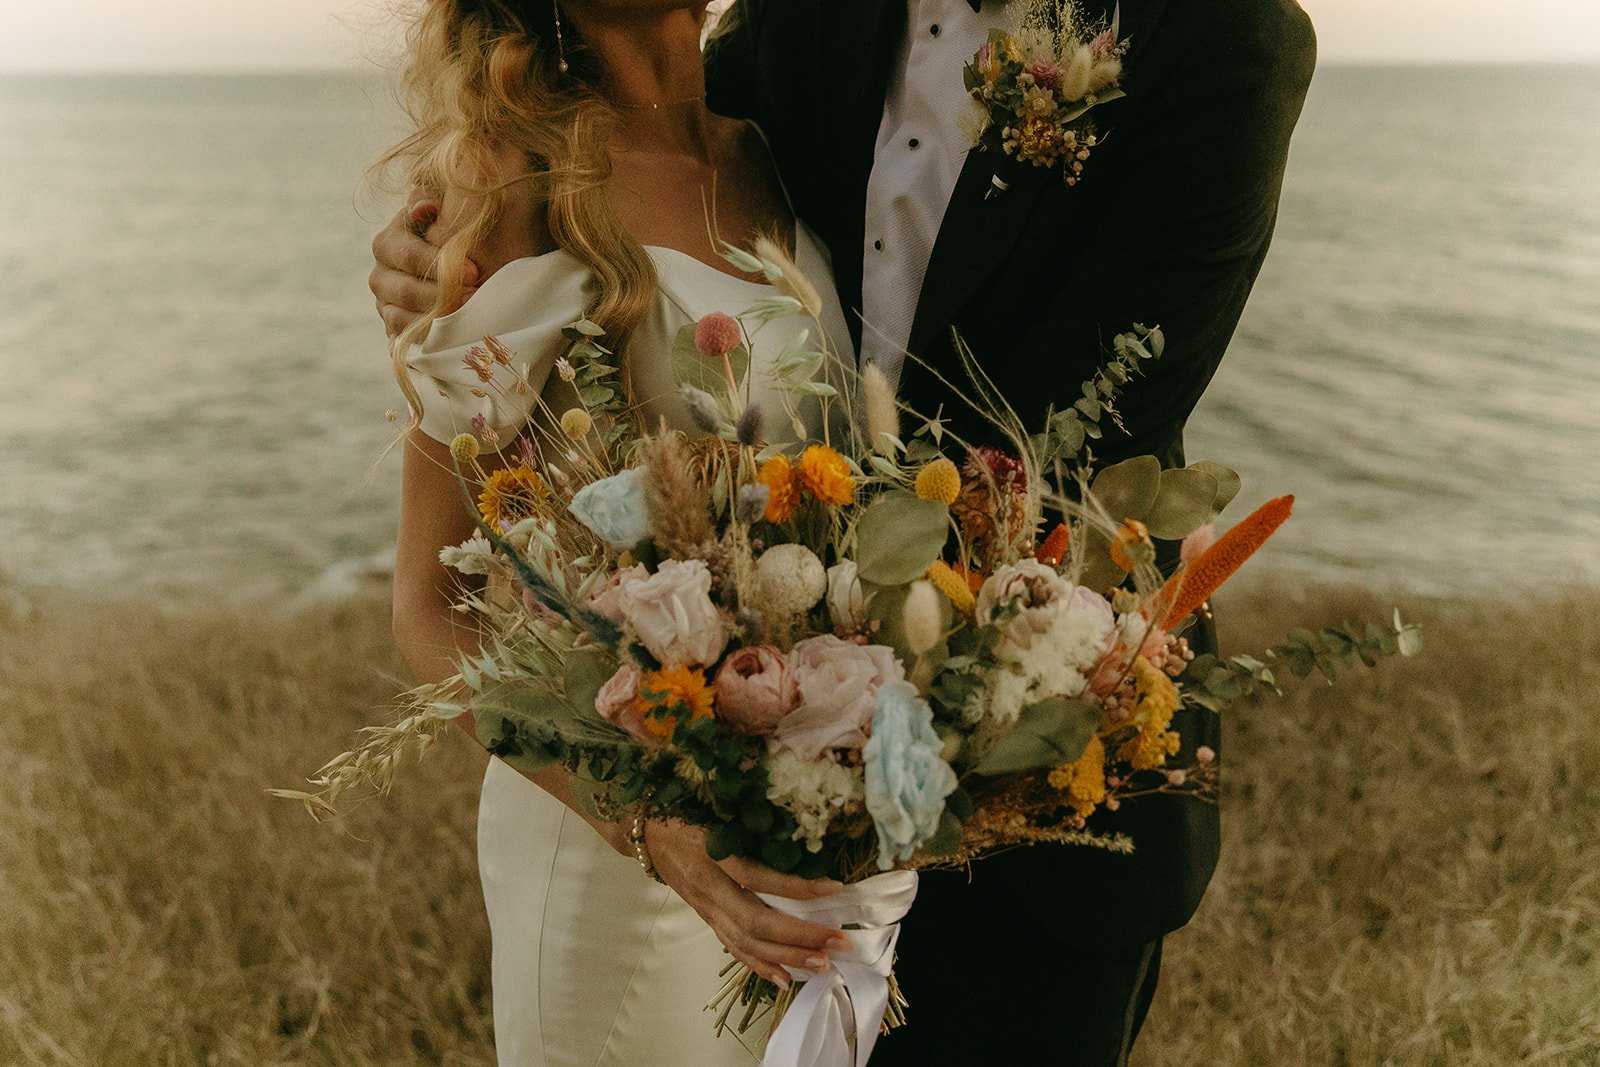 A Fun Intimate Wedding Day at Point San Luis Lighthouse With Elegant Wedding Decor and florals